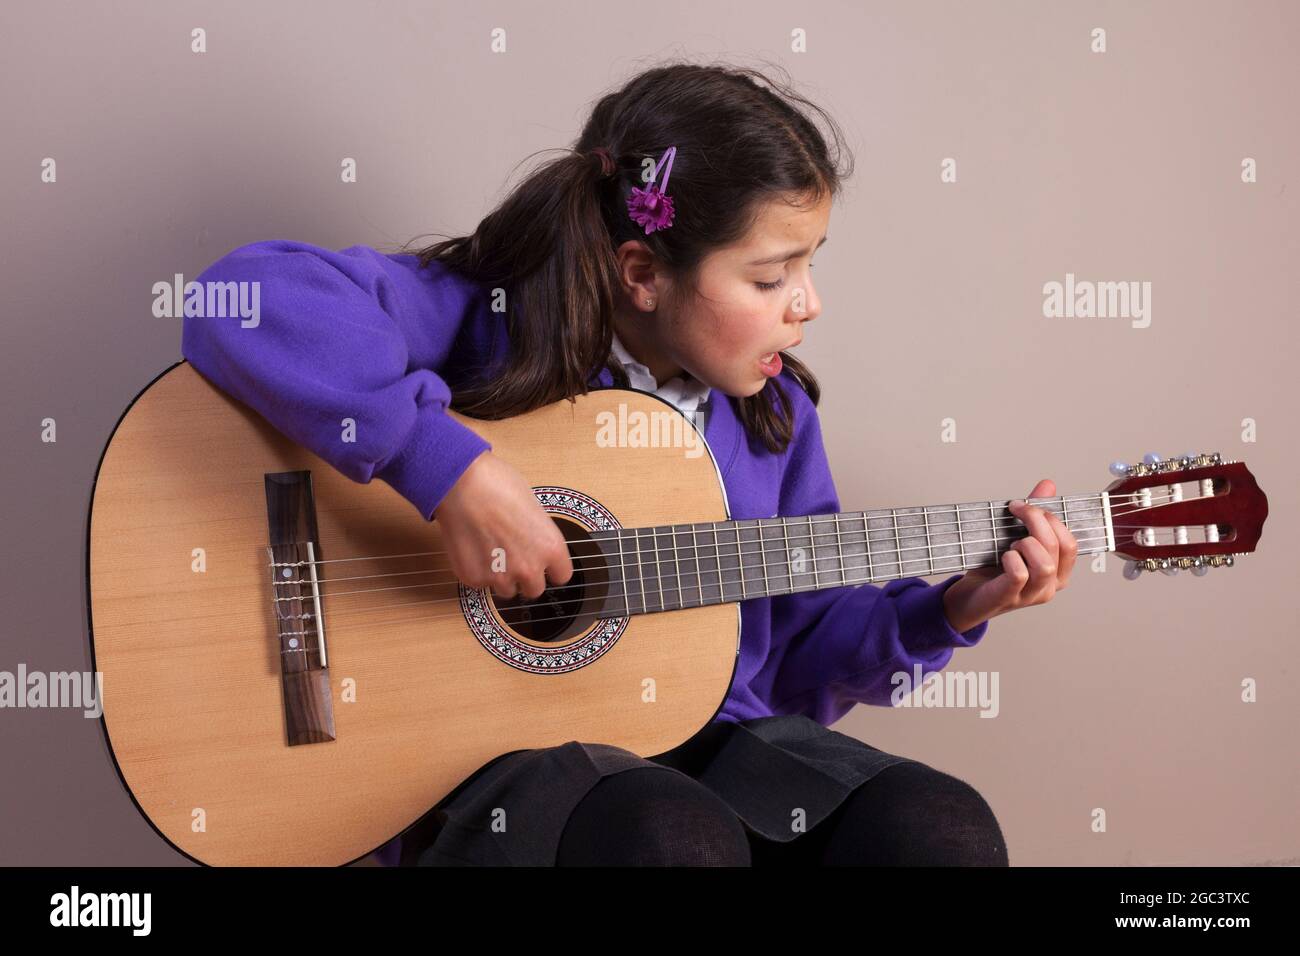 Young girl in UK scholl uniform  sings and plays acoustic guitar Stock Photo